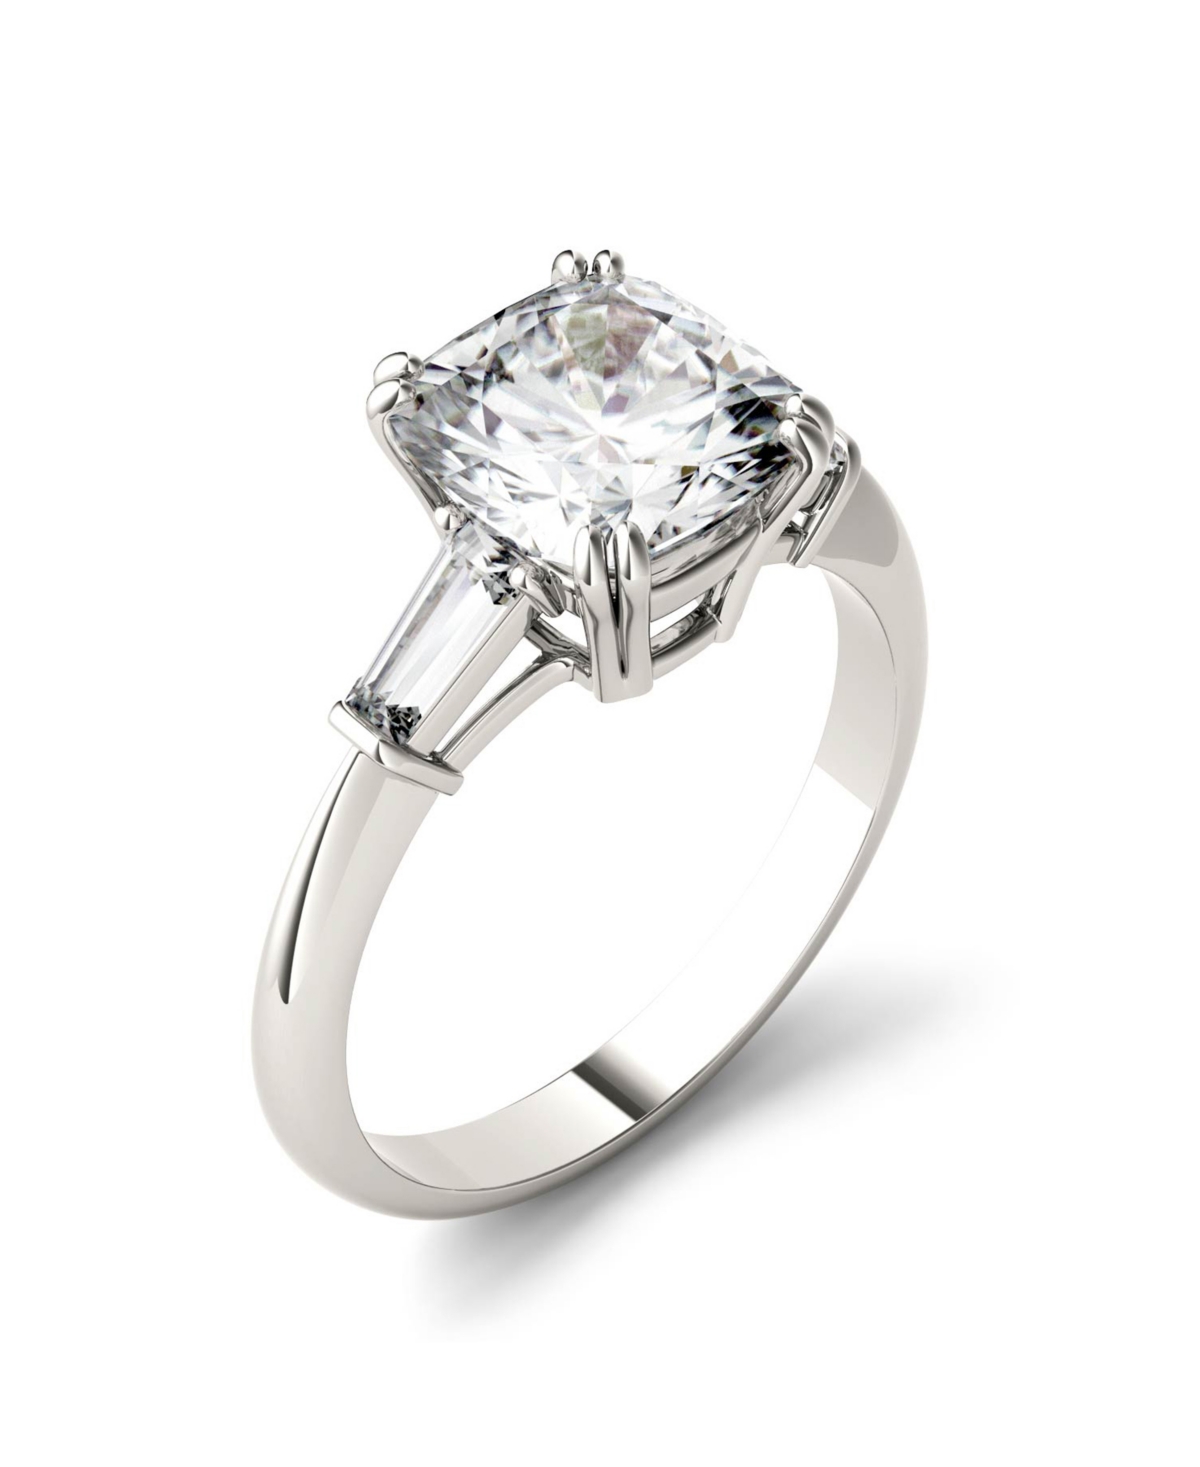 Charles & Colvard Moissanite Cushion and Baguette Engagement Ring 2-3/4 ct. t.w. Diamond Equivalent in 14k White Gold